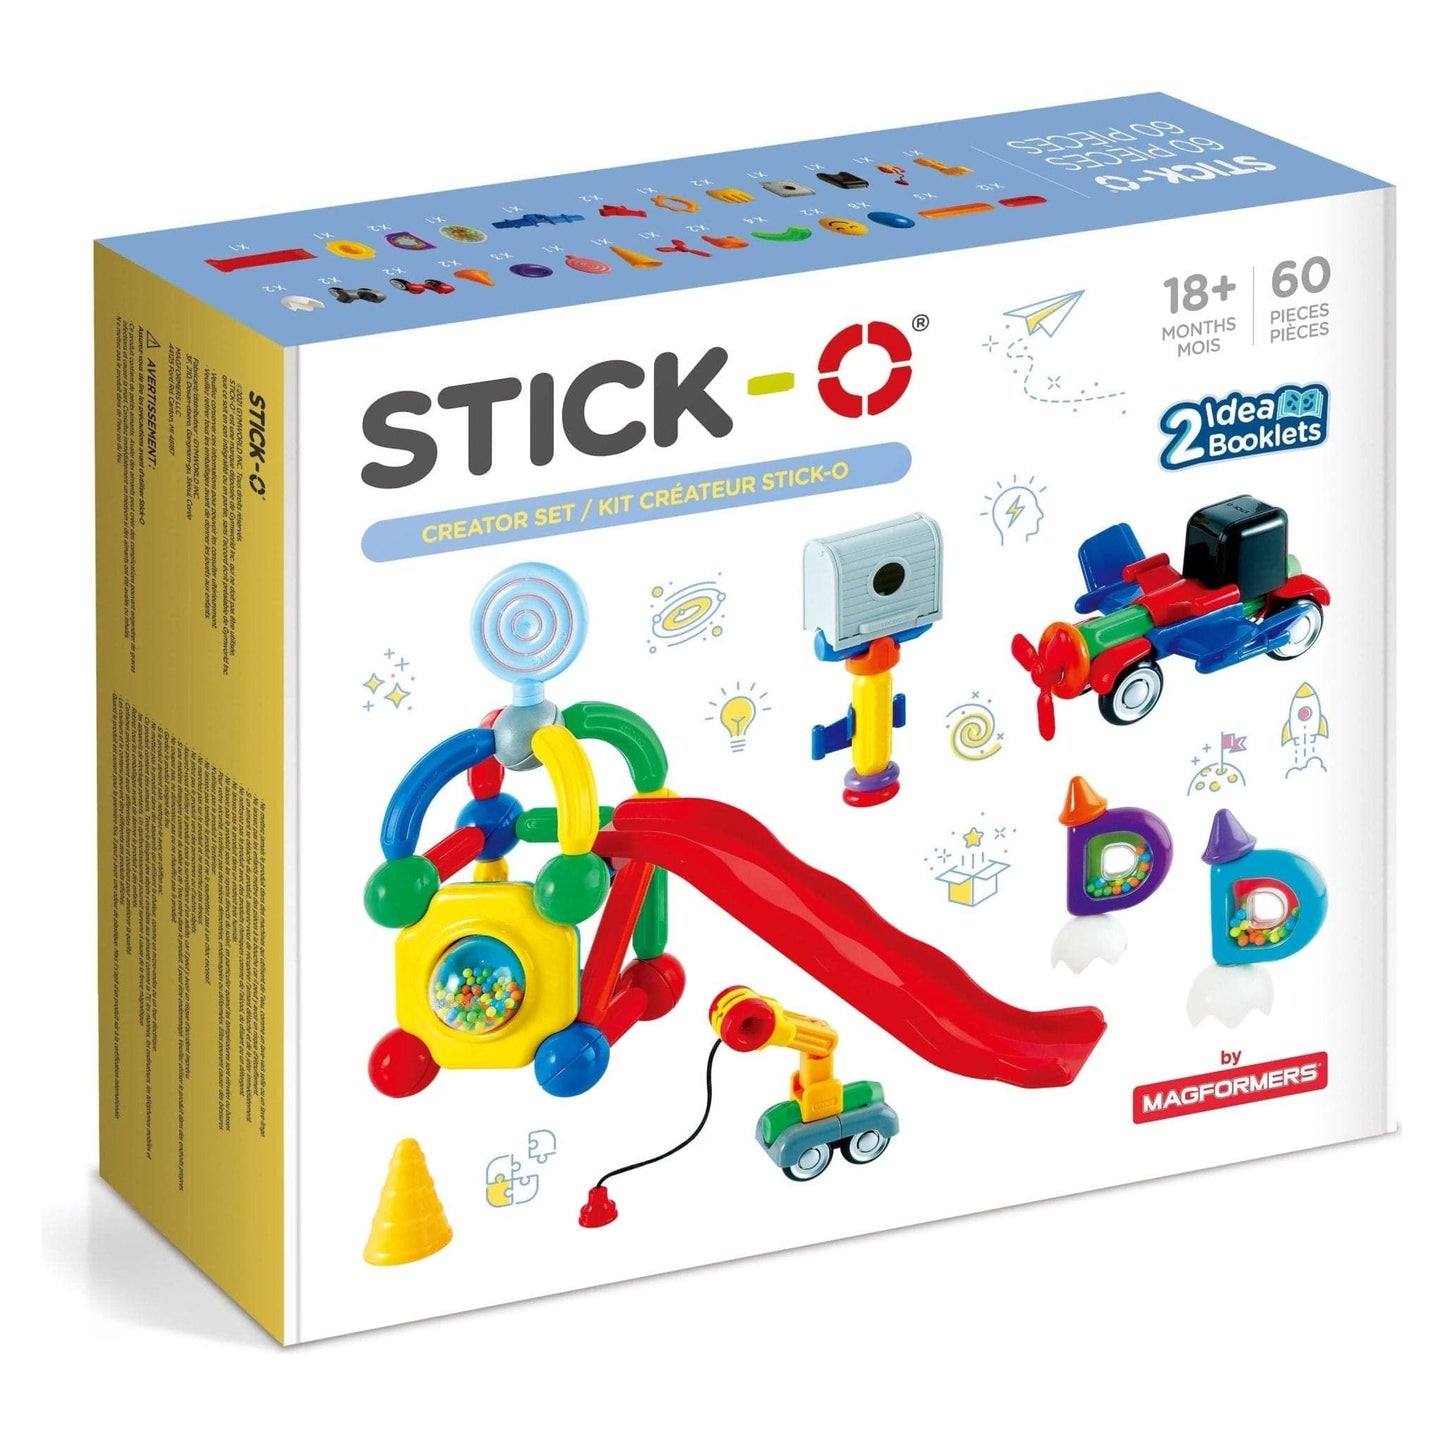 Magformers Stick-O Creator 60 Piece Set front of box